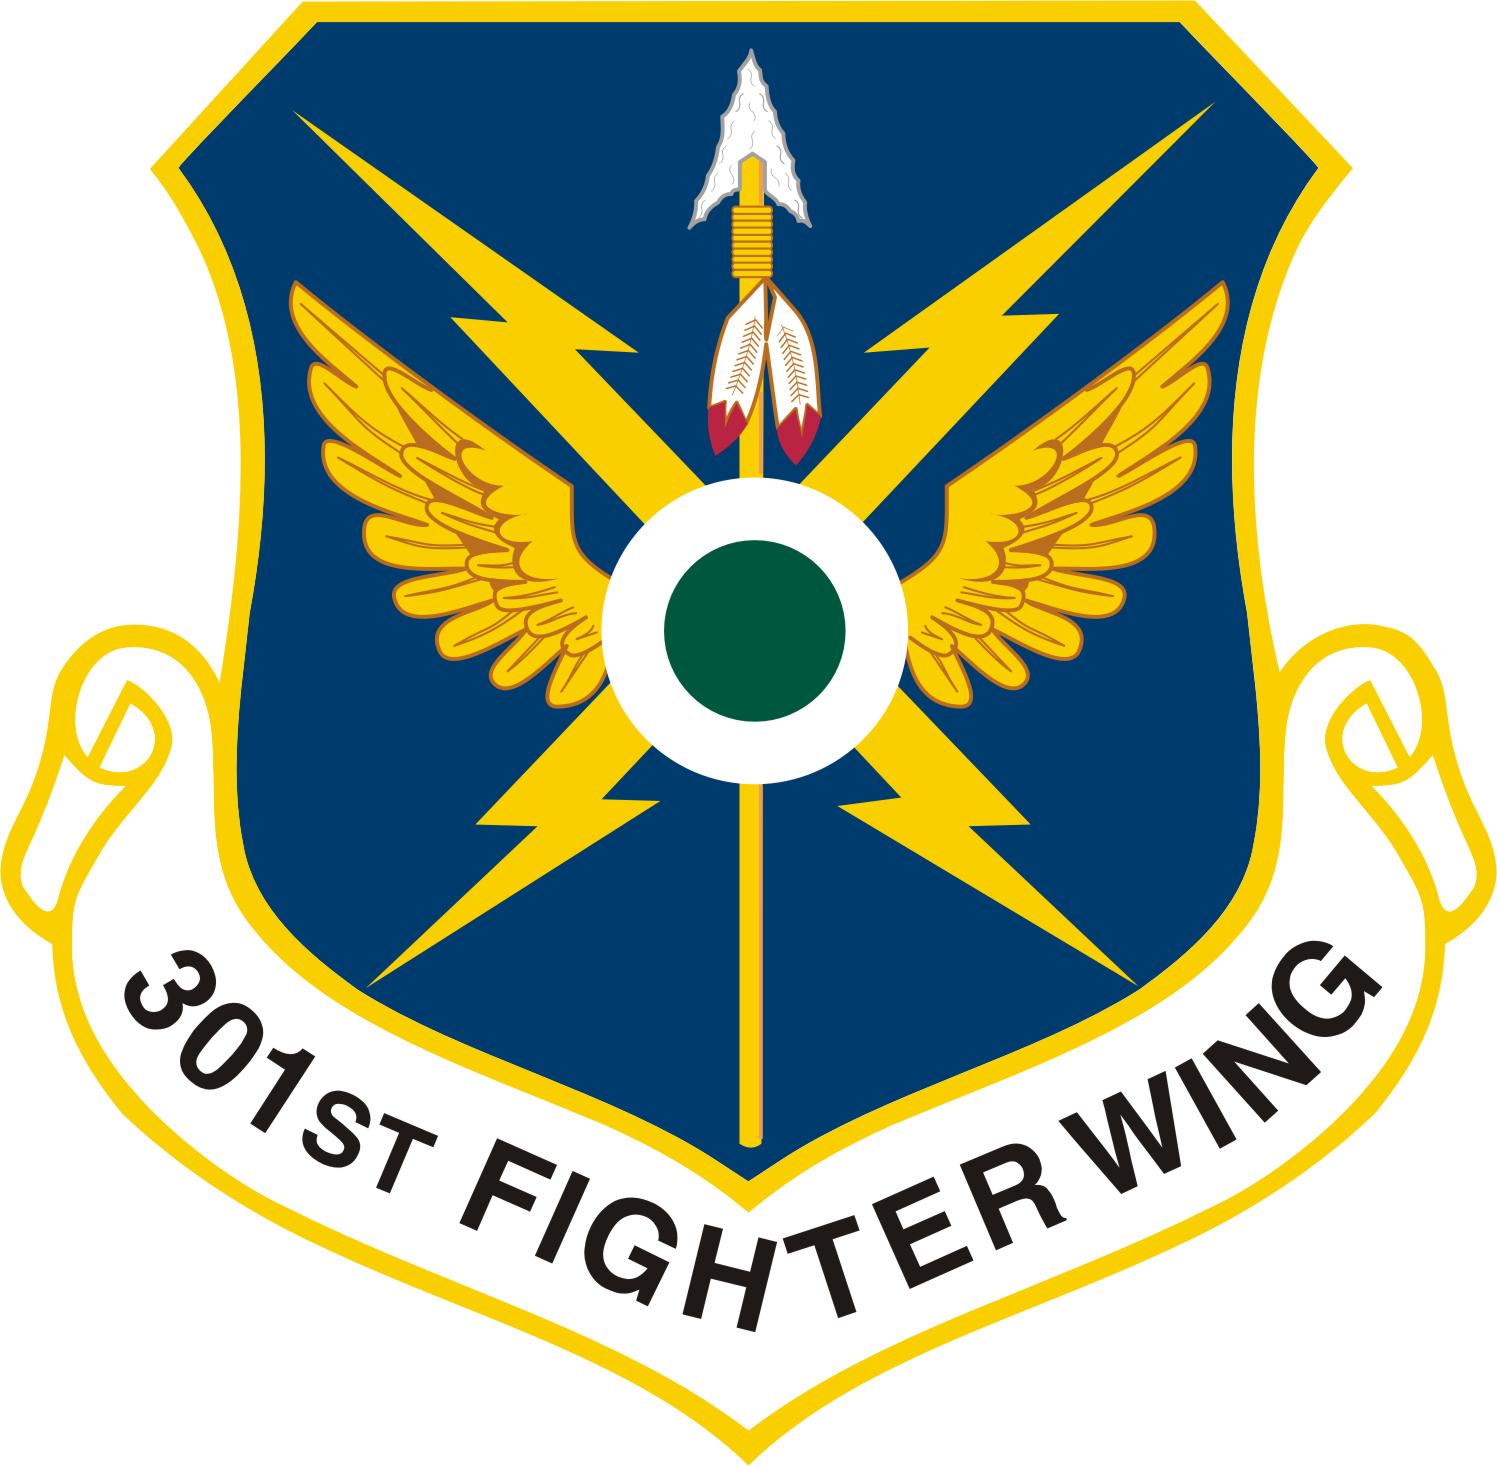 Force shield. 35 Fighter Wing logo. 57 Fighter Wing logo. Saint Fighter.